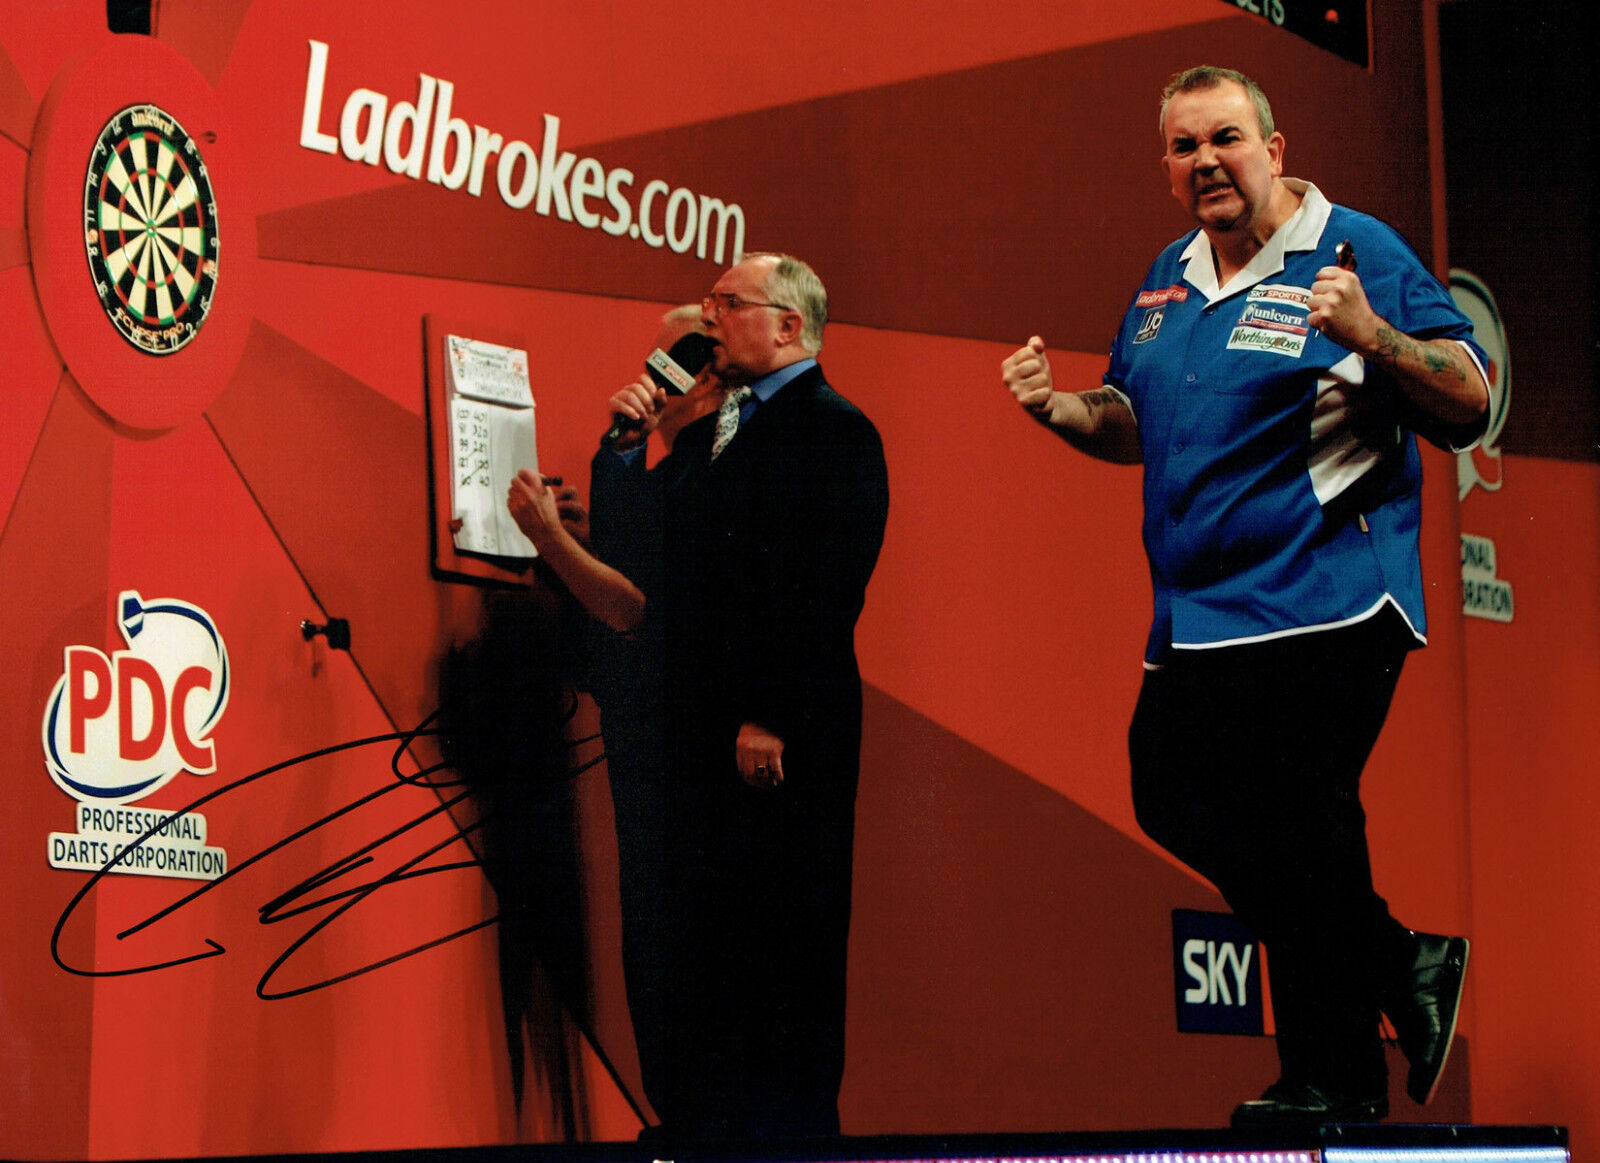 The POWER Phil TAYLOR Signed Autograph Darts 16x12 Action Photo Poster painting AFTAL COA